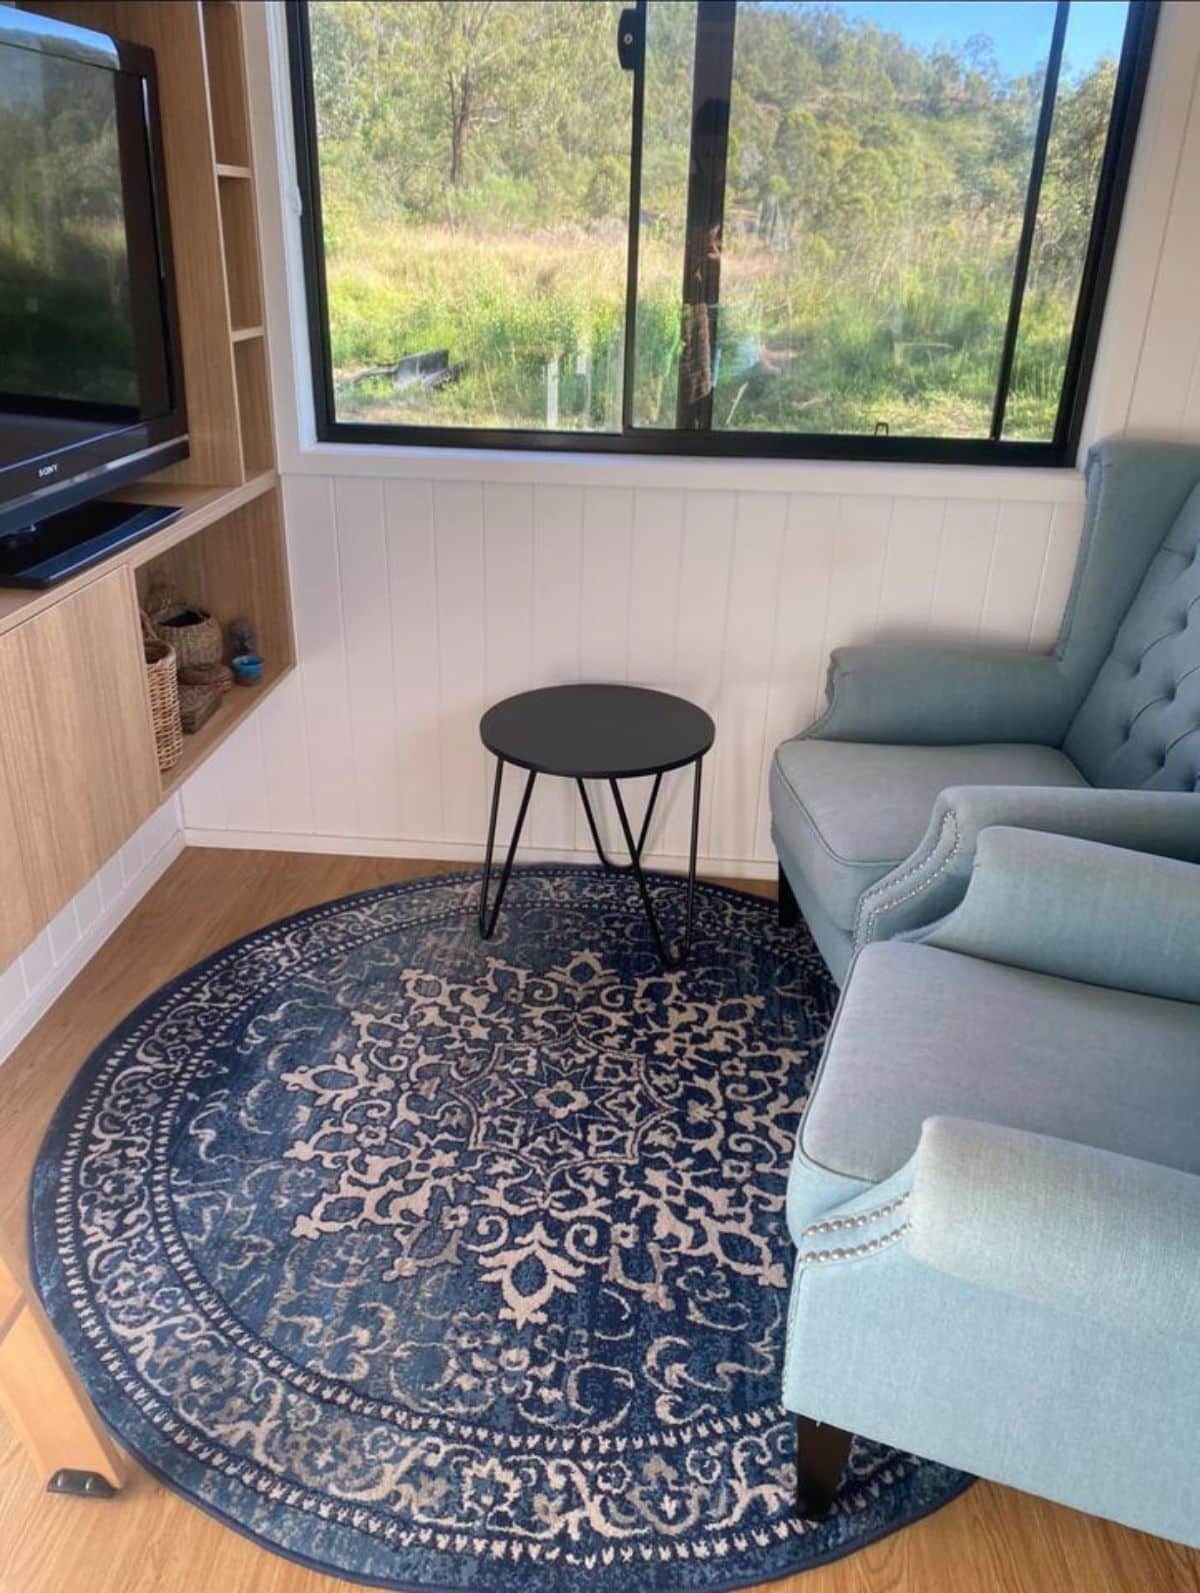 Living area of sustainable tiny home has a couch, center table and wall mounted tv set